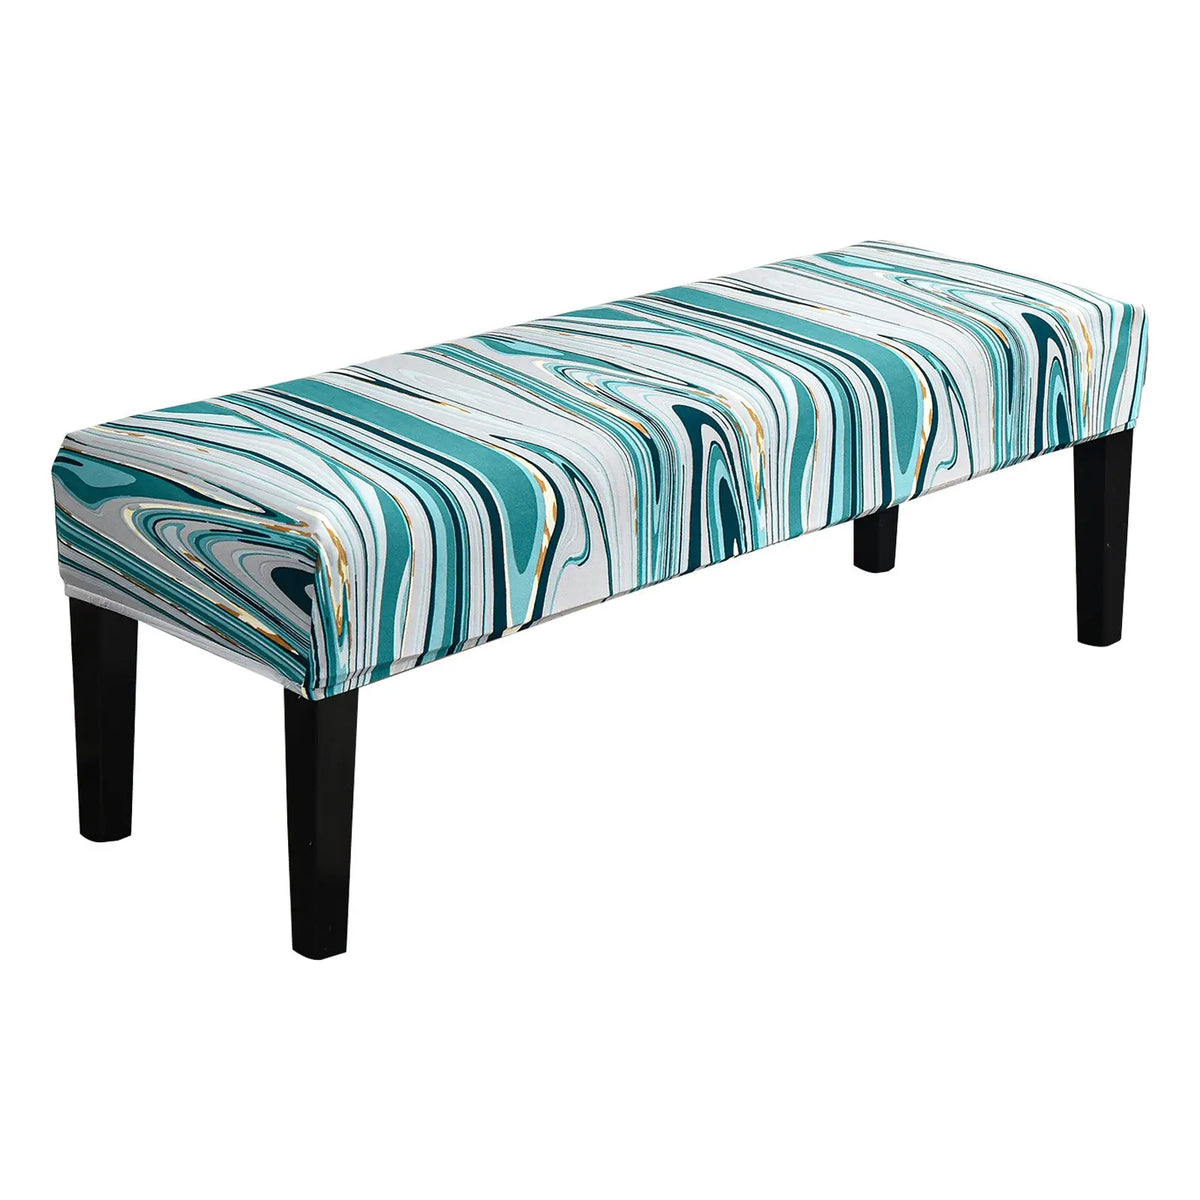 Elastic Textured Bench Cover Slipcover Plaid Striped Decorative Furniture Slipcover Crfatop Crfatop %sku%